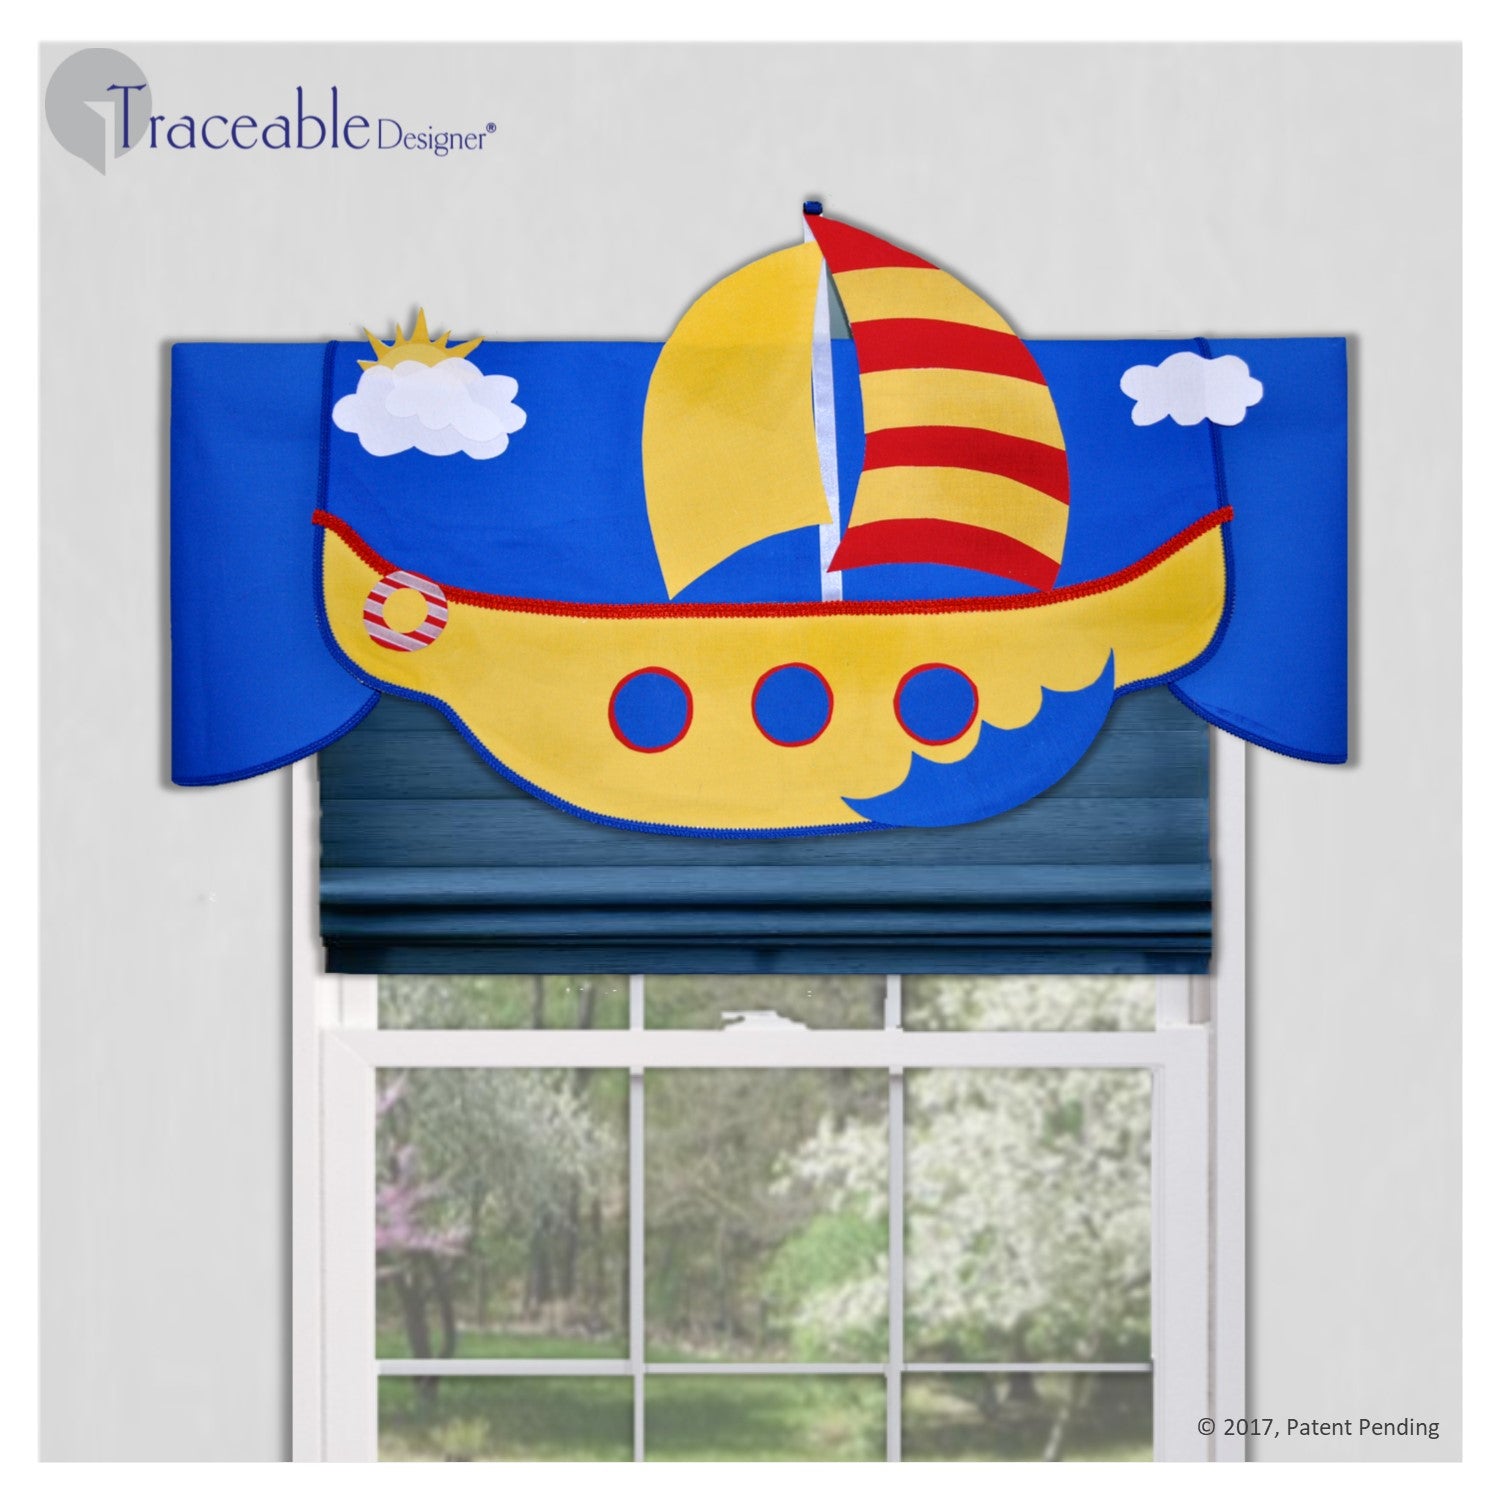 DIY children's sailboat valance, adventure room decor for bedroom or nursery, colorful, no sewing, kit also includes rocket, sub and airplane window treatments.  Designed by Linda Schurr